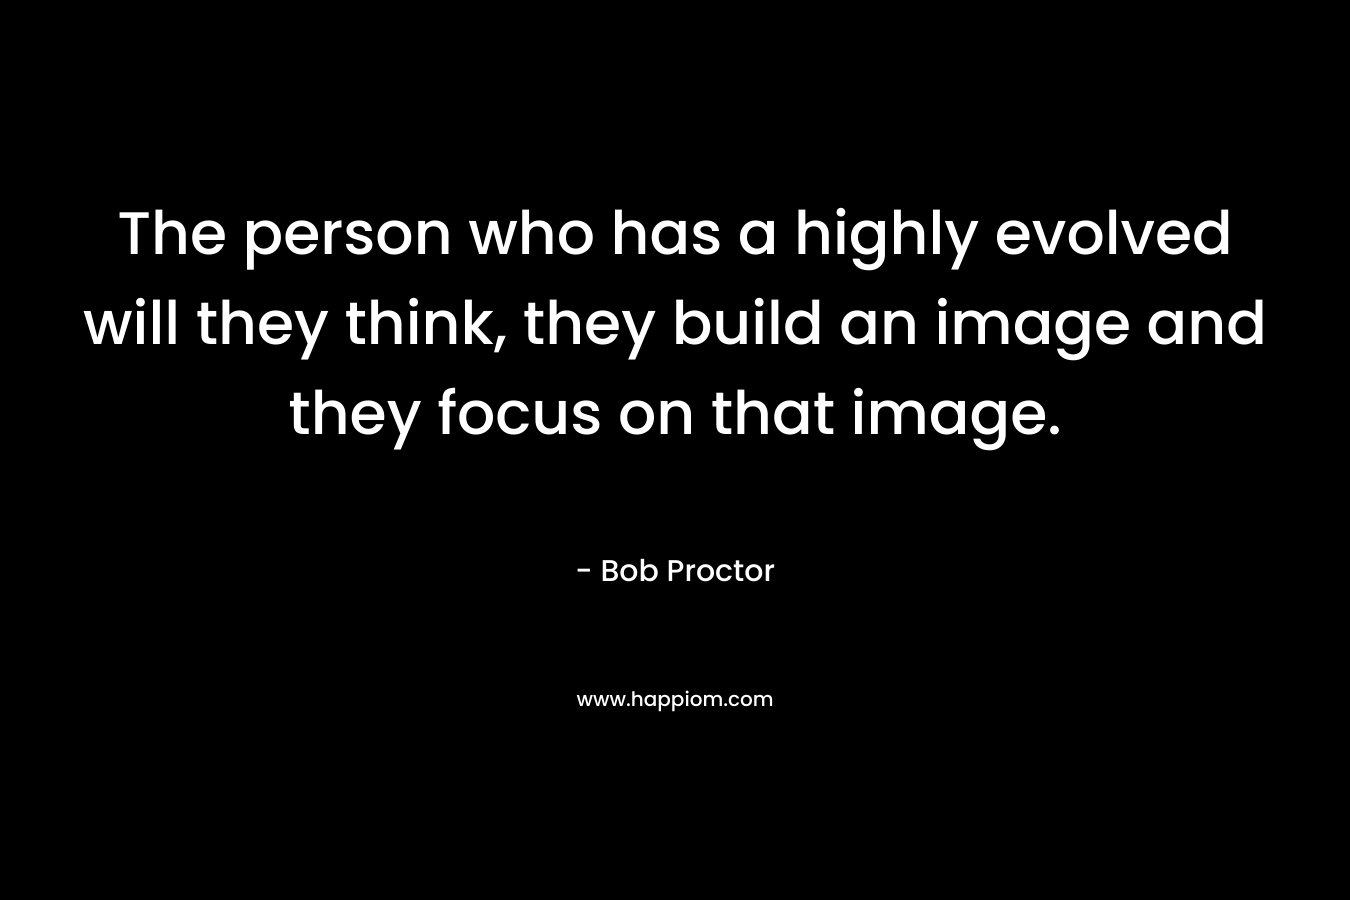 The person who has a highly evolved will they think, they build an image and they focus on that image.